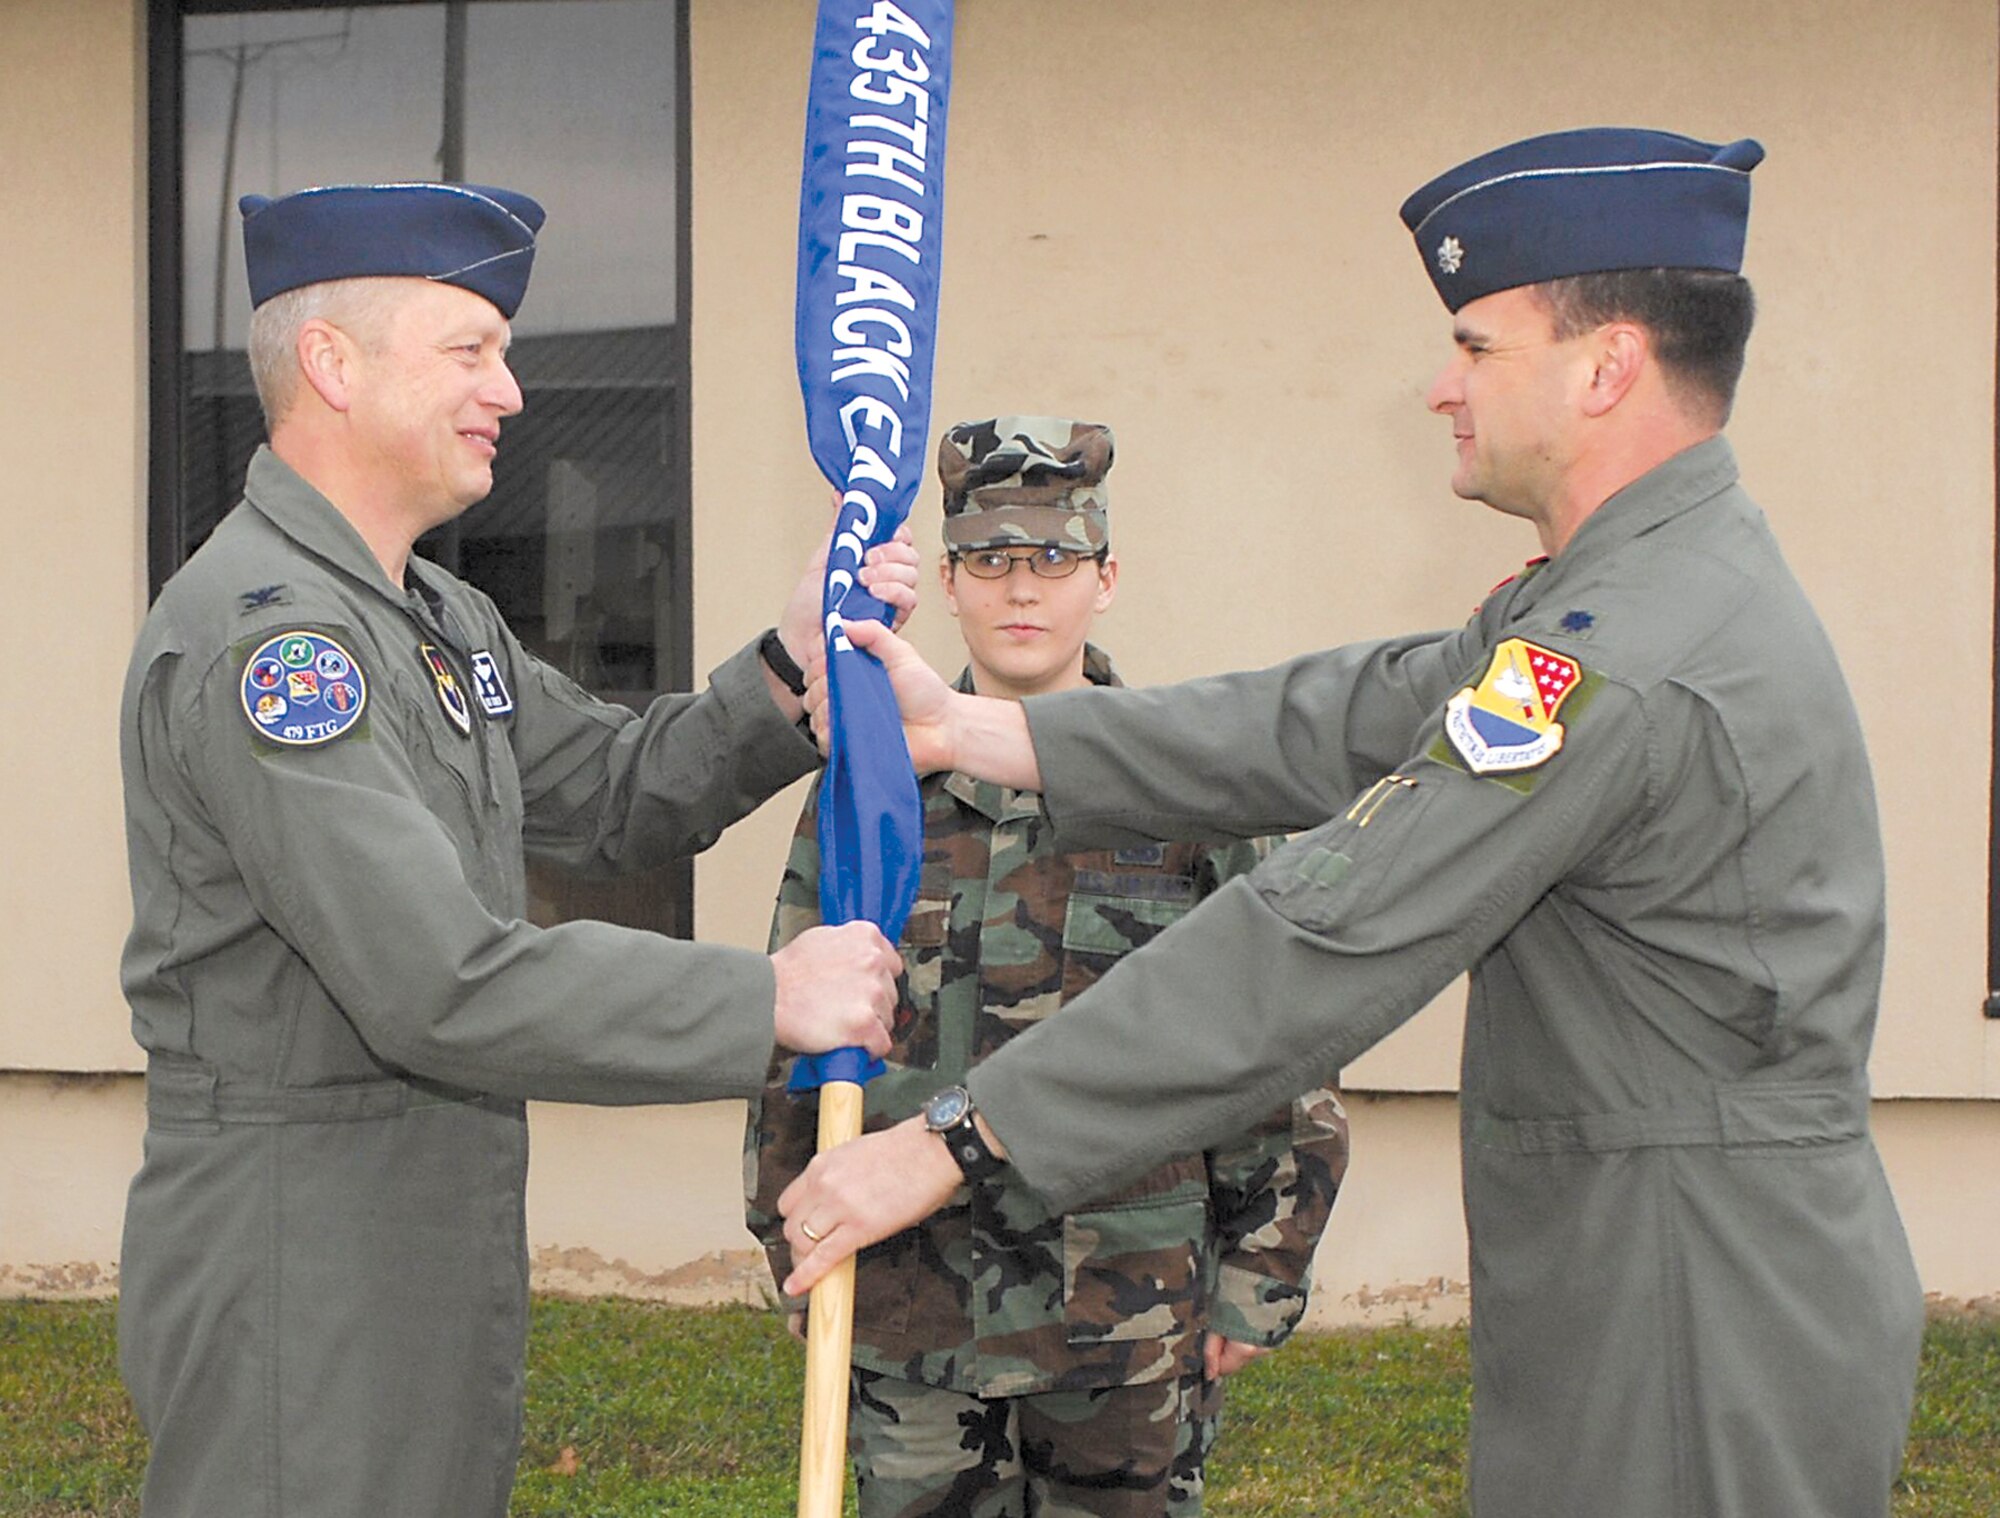 MOODY AIR FORCE BASE, Ga. -- Col. Richard Turner, 479th Flying Training Group commander, passes the 435th Flying Training Squadron guidon to Lt. Col. Robert Sweet, 435th Flying Training Squadron commander, here at the 435th FTS relocation ceremony March 1. The 435th FTS is in the process of relocating from Moody to Randolph Air Force Base, Texas. (U.S. Air Force photo by Senior Airman Angelita Lawrence)